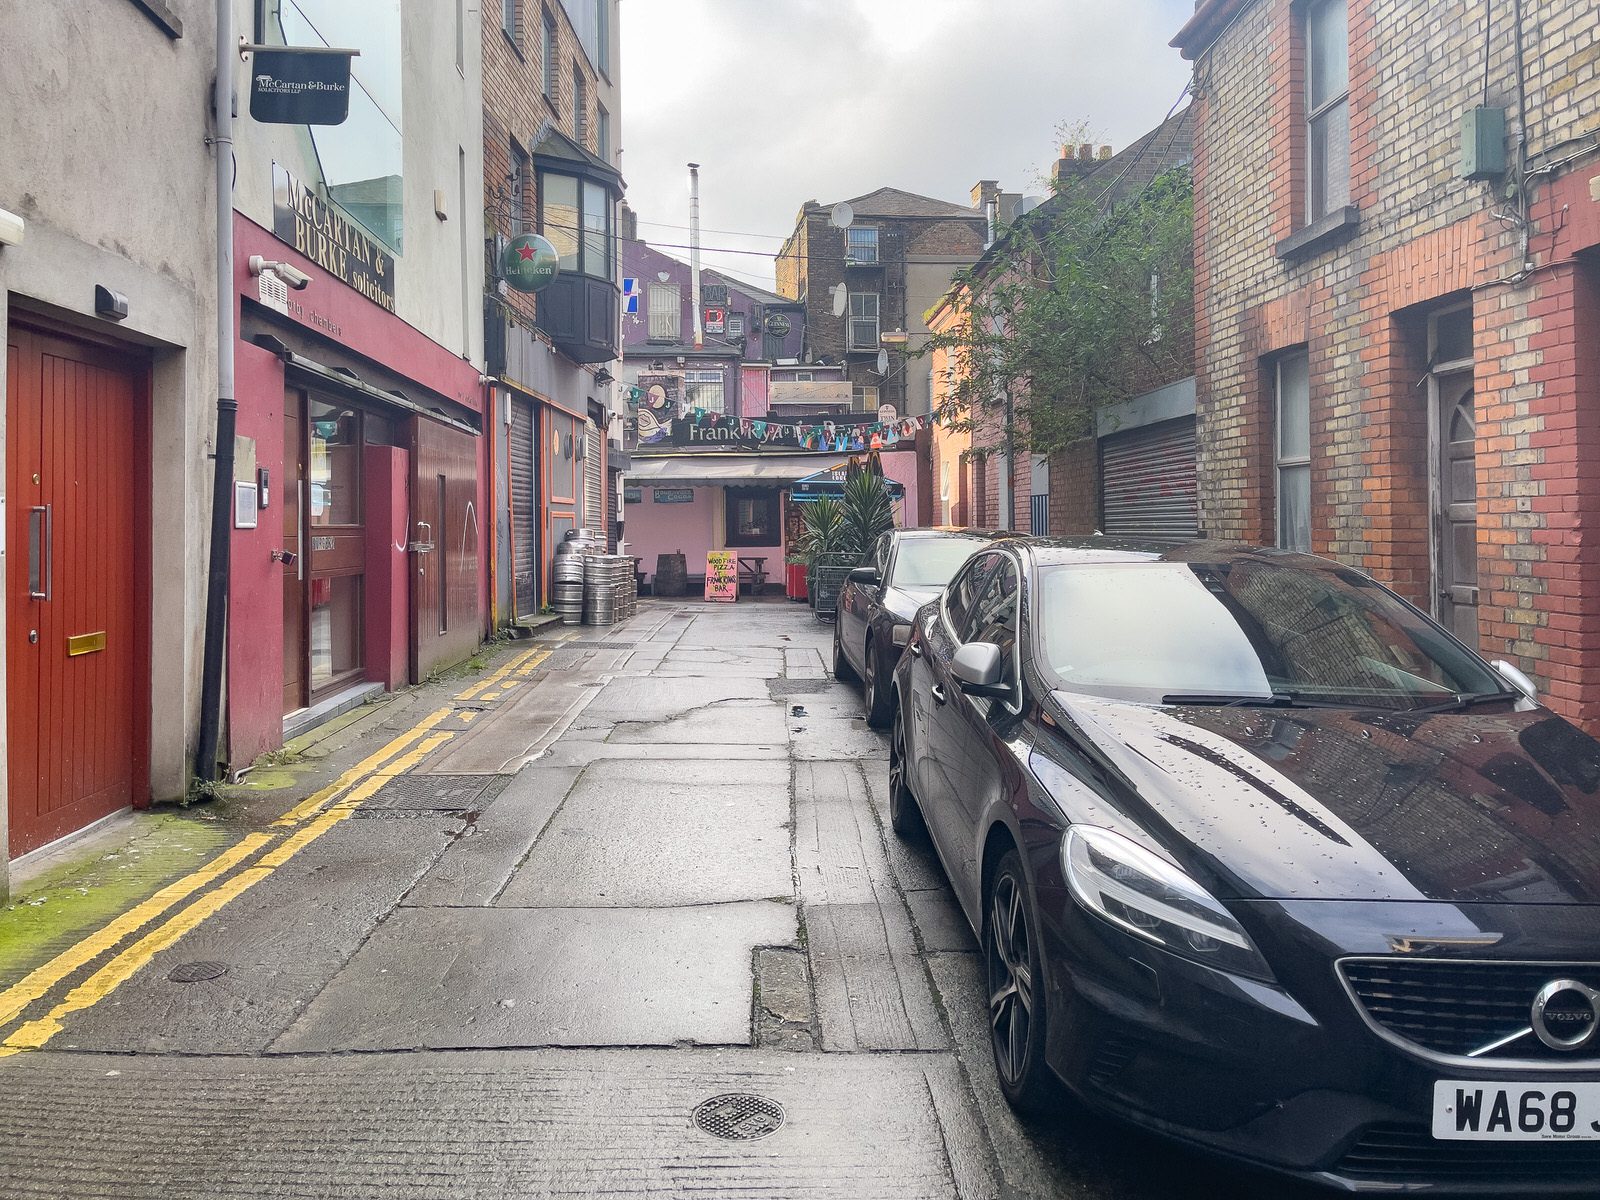 ANOTHER VISIT TO COKE LANE [SMITHFIELD AREA OF DUBLIN]-228135-1